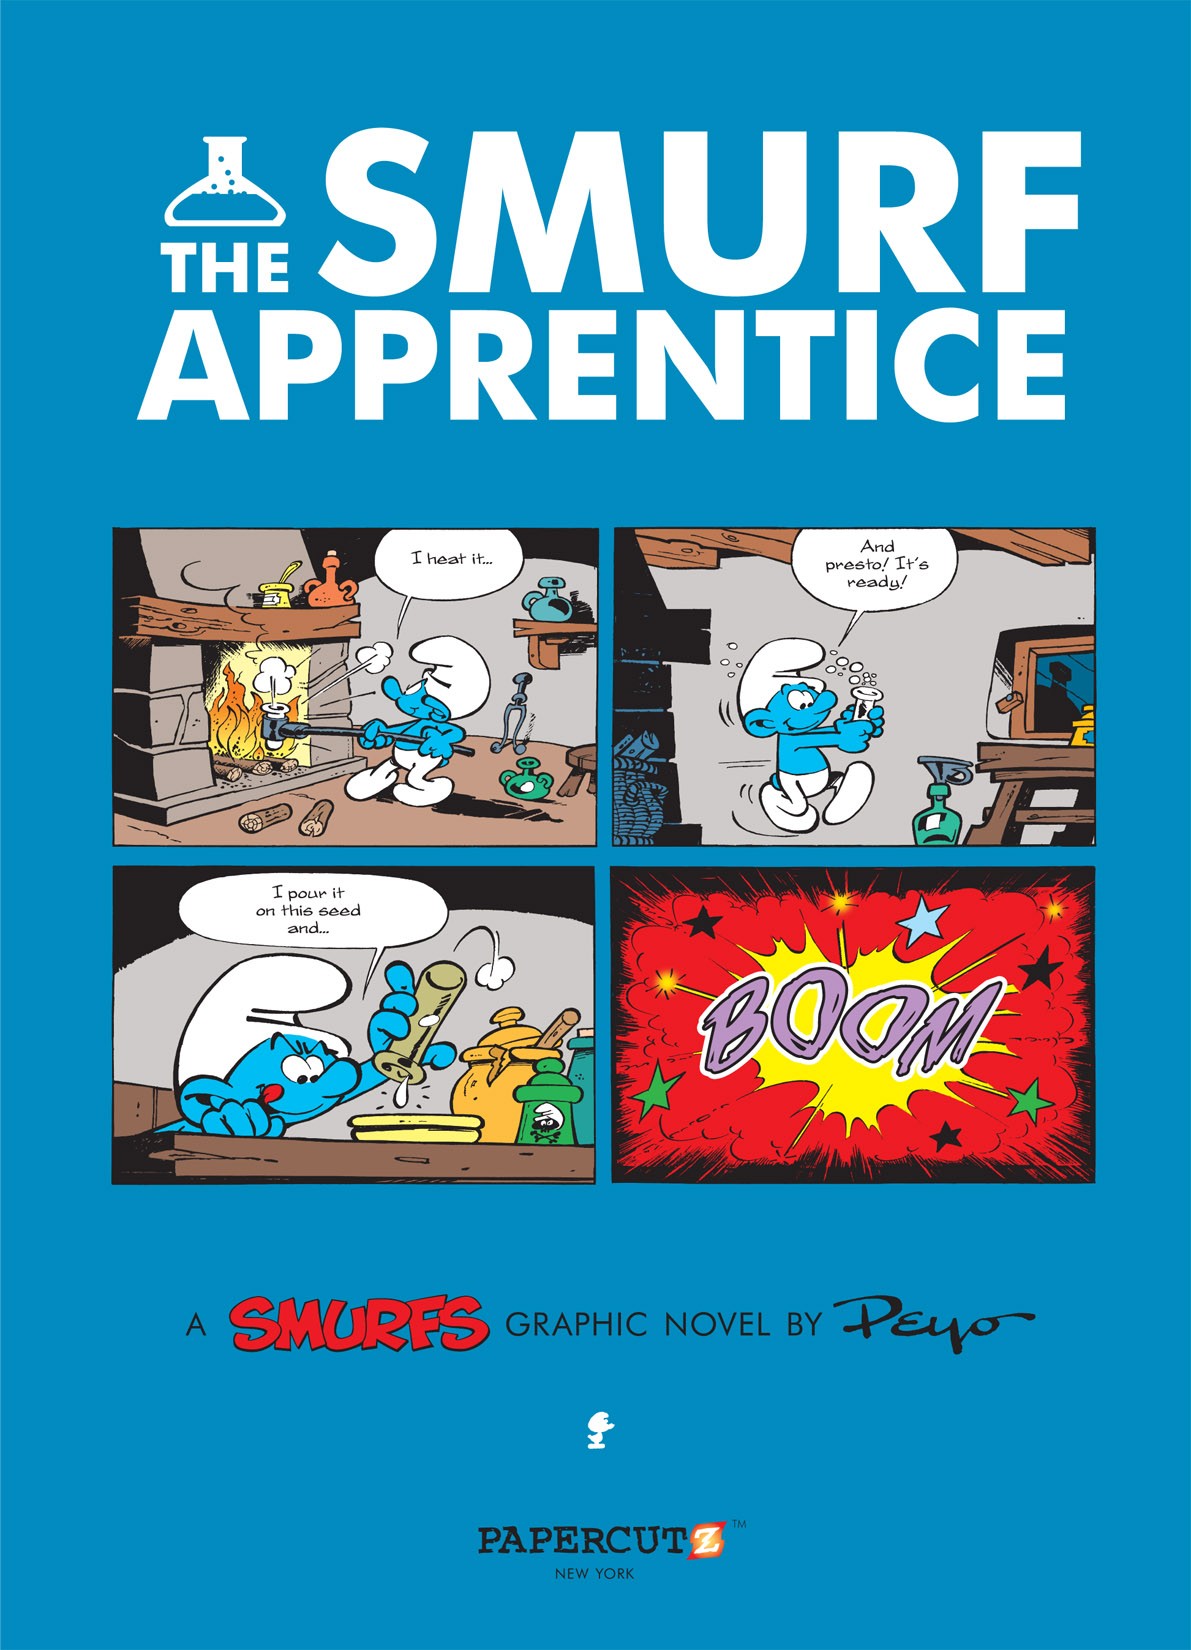 Read online The Smurfs comic -  Issue #8 - 3